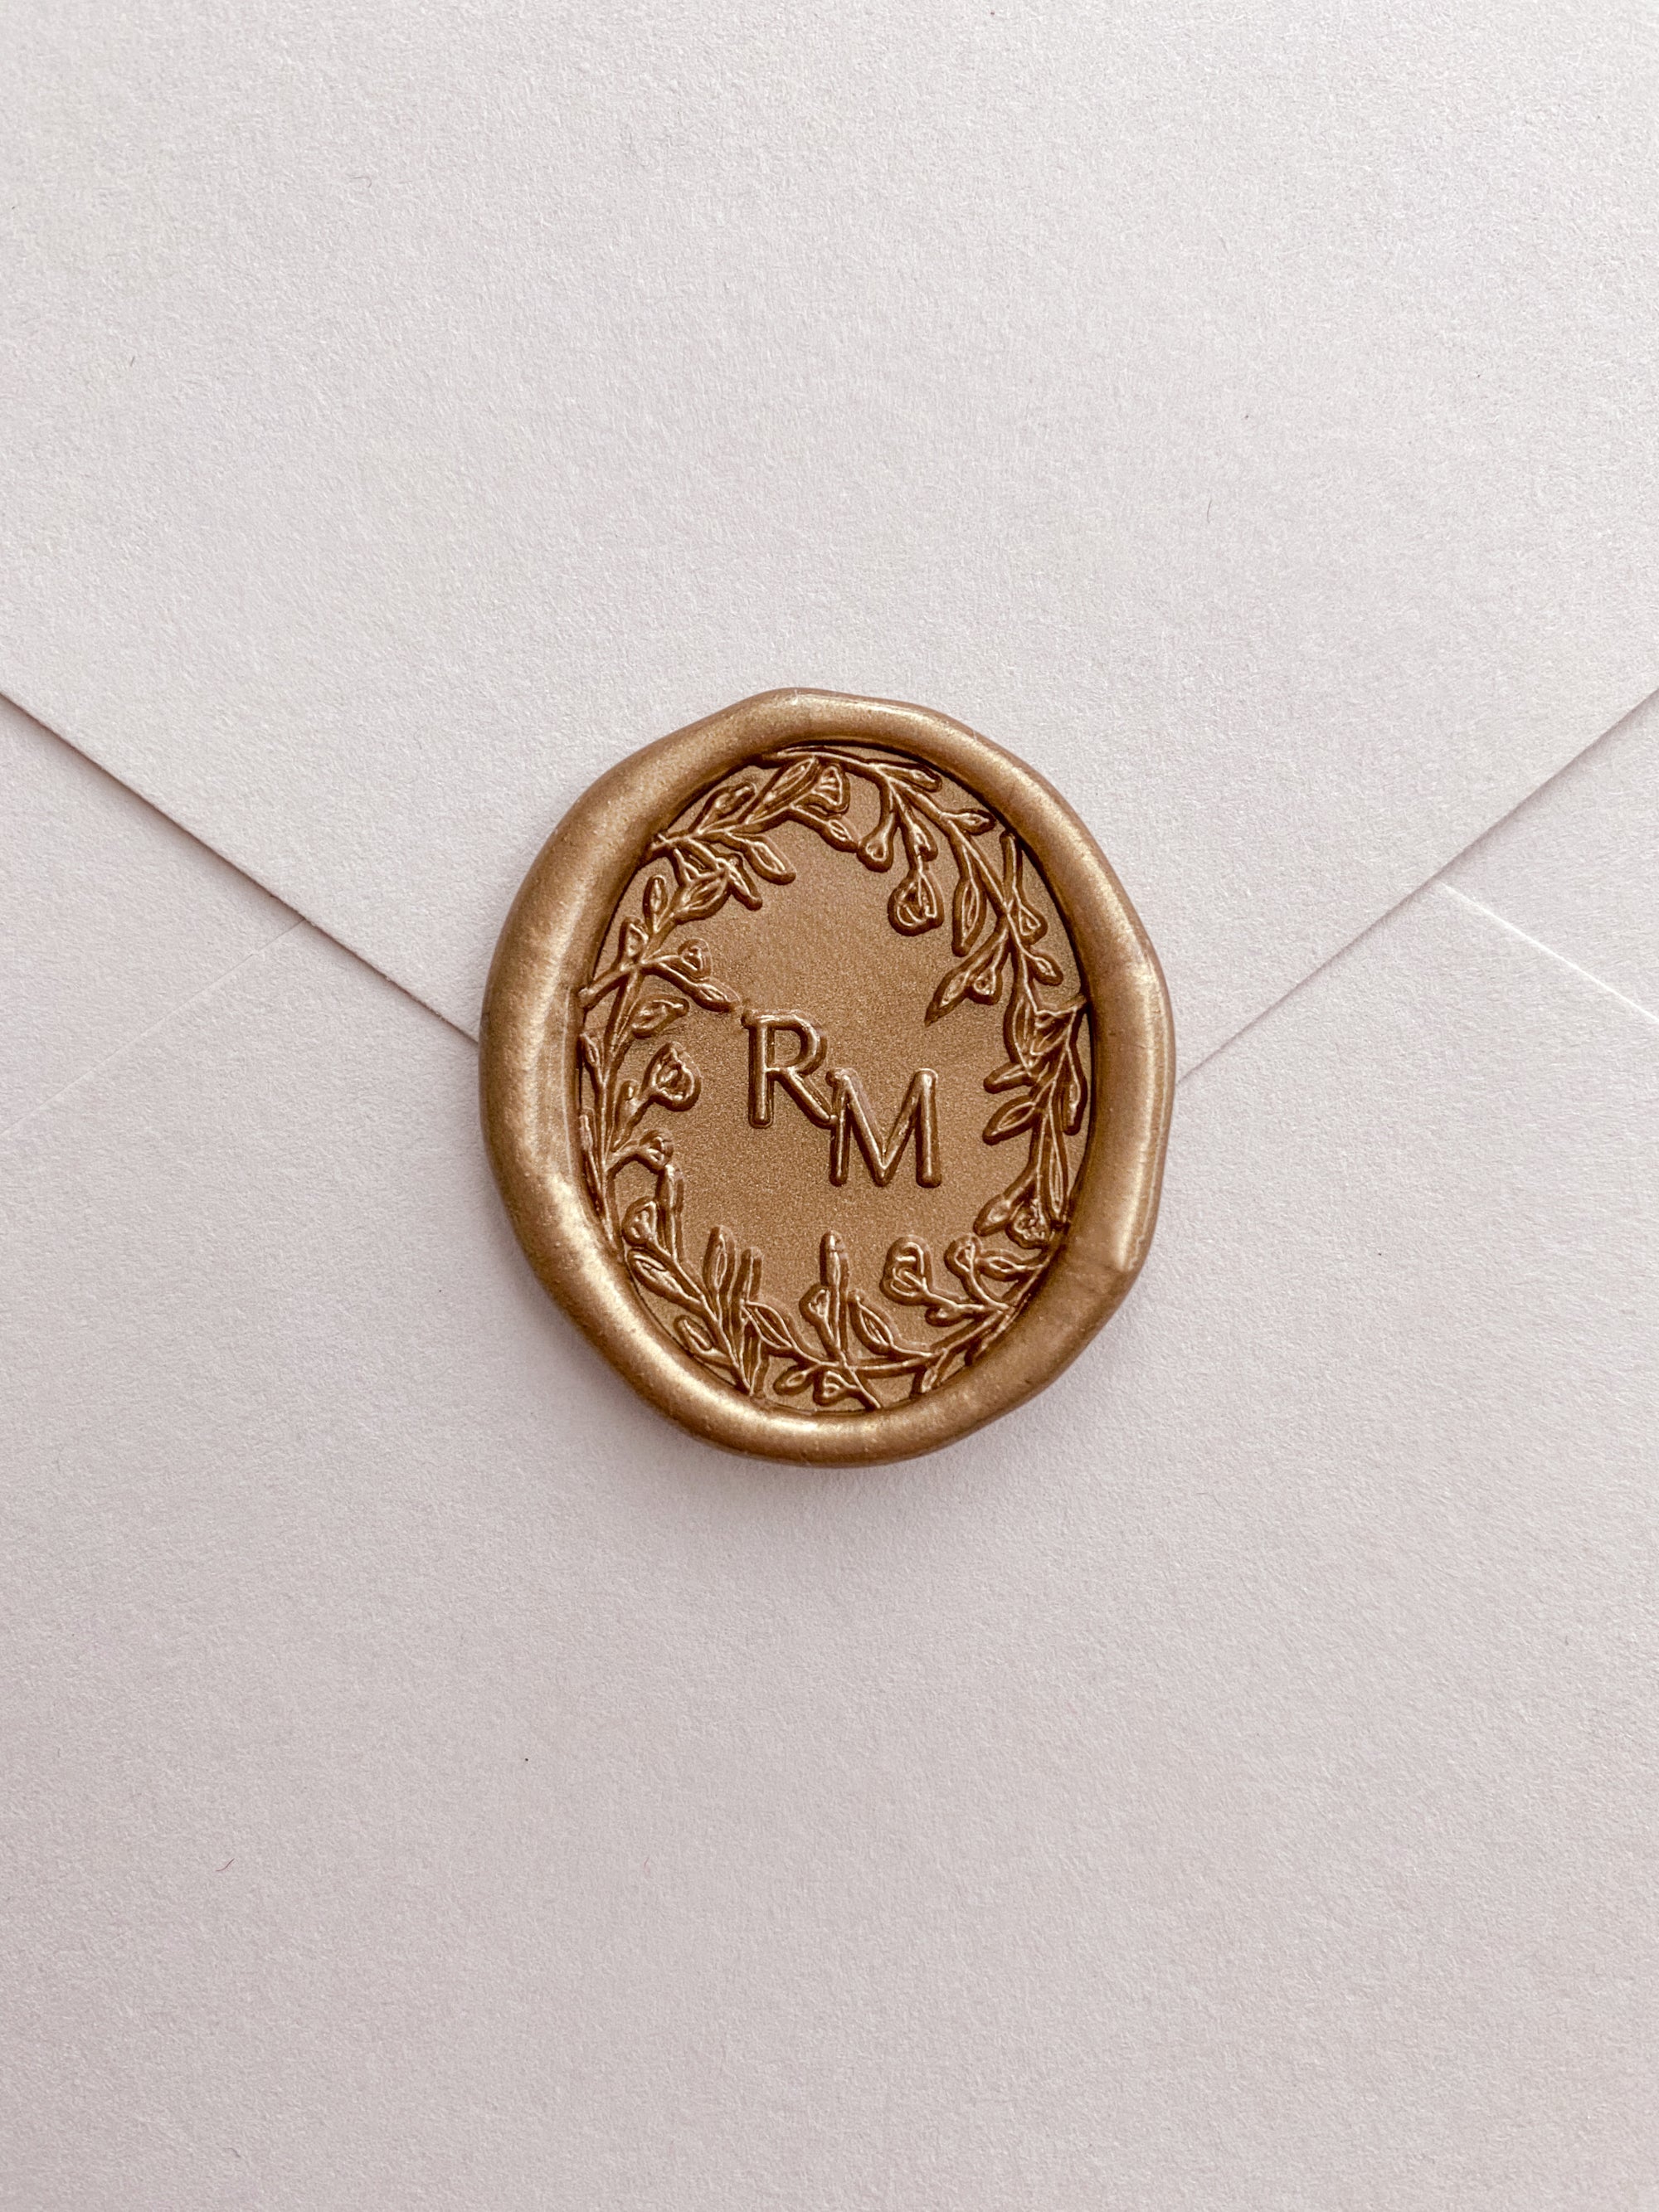 Personalized Wax Seal Stamp With 3 Triple Initials Monogram , Interwoven  Initials Wax Seal Stamp,custom Wax Seal Stamp L67 